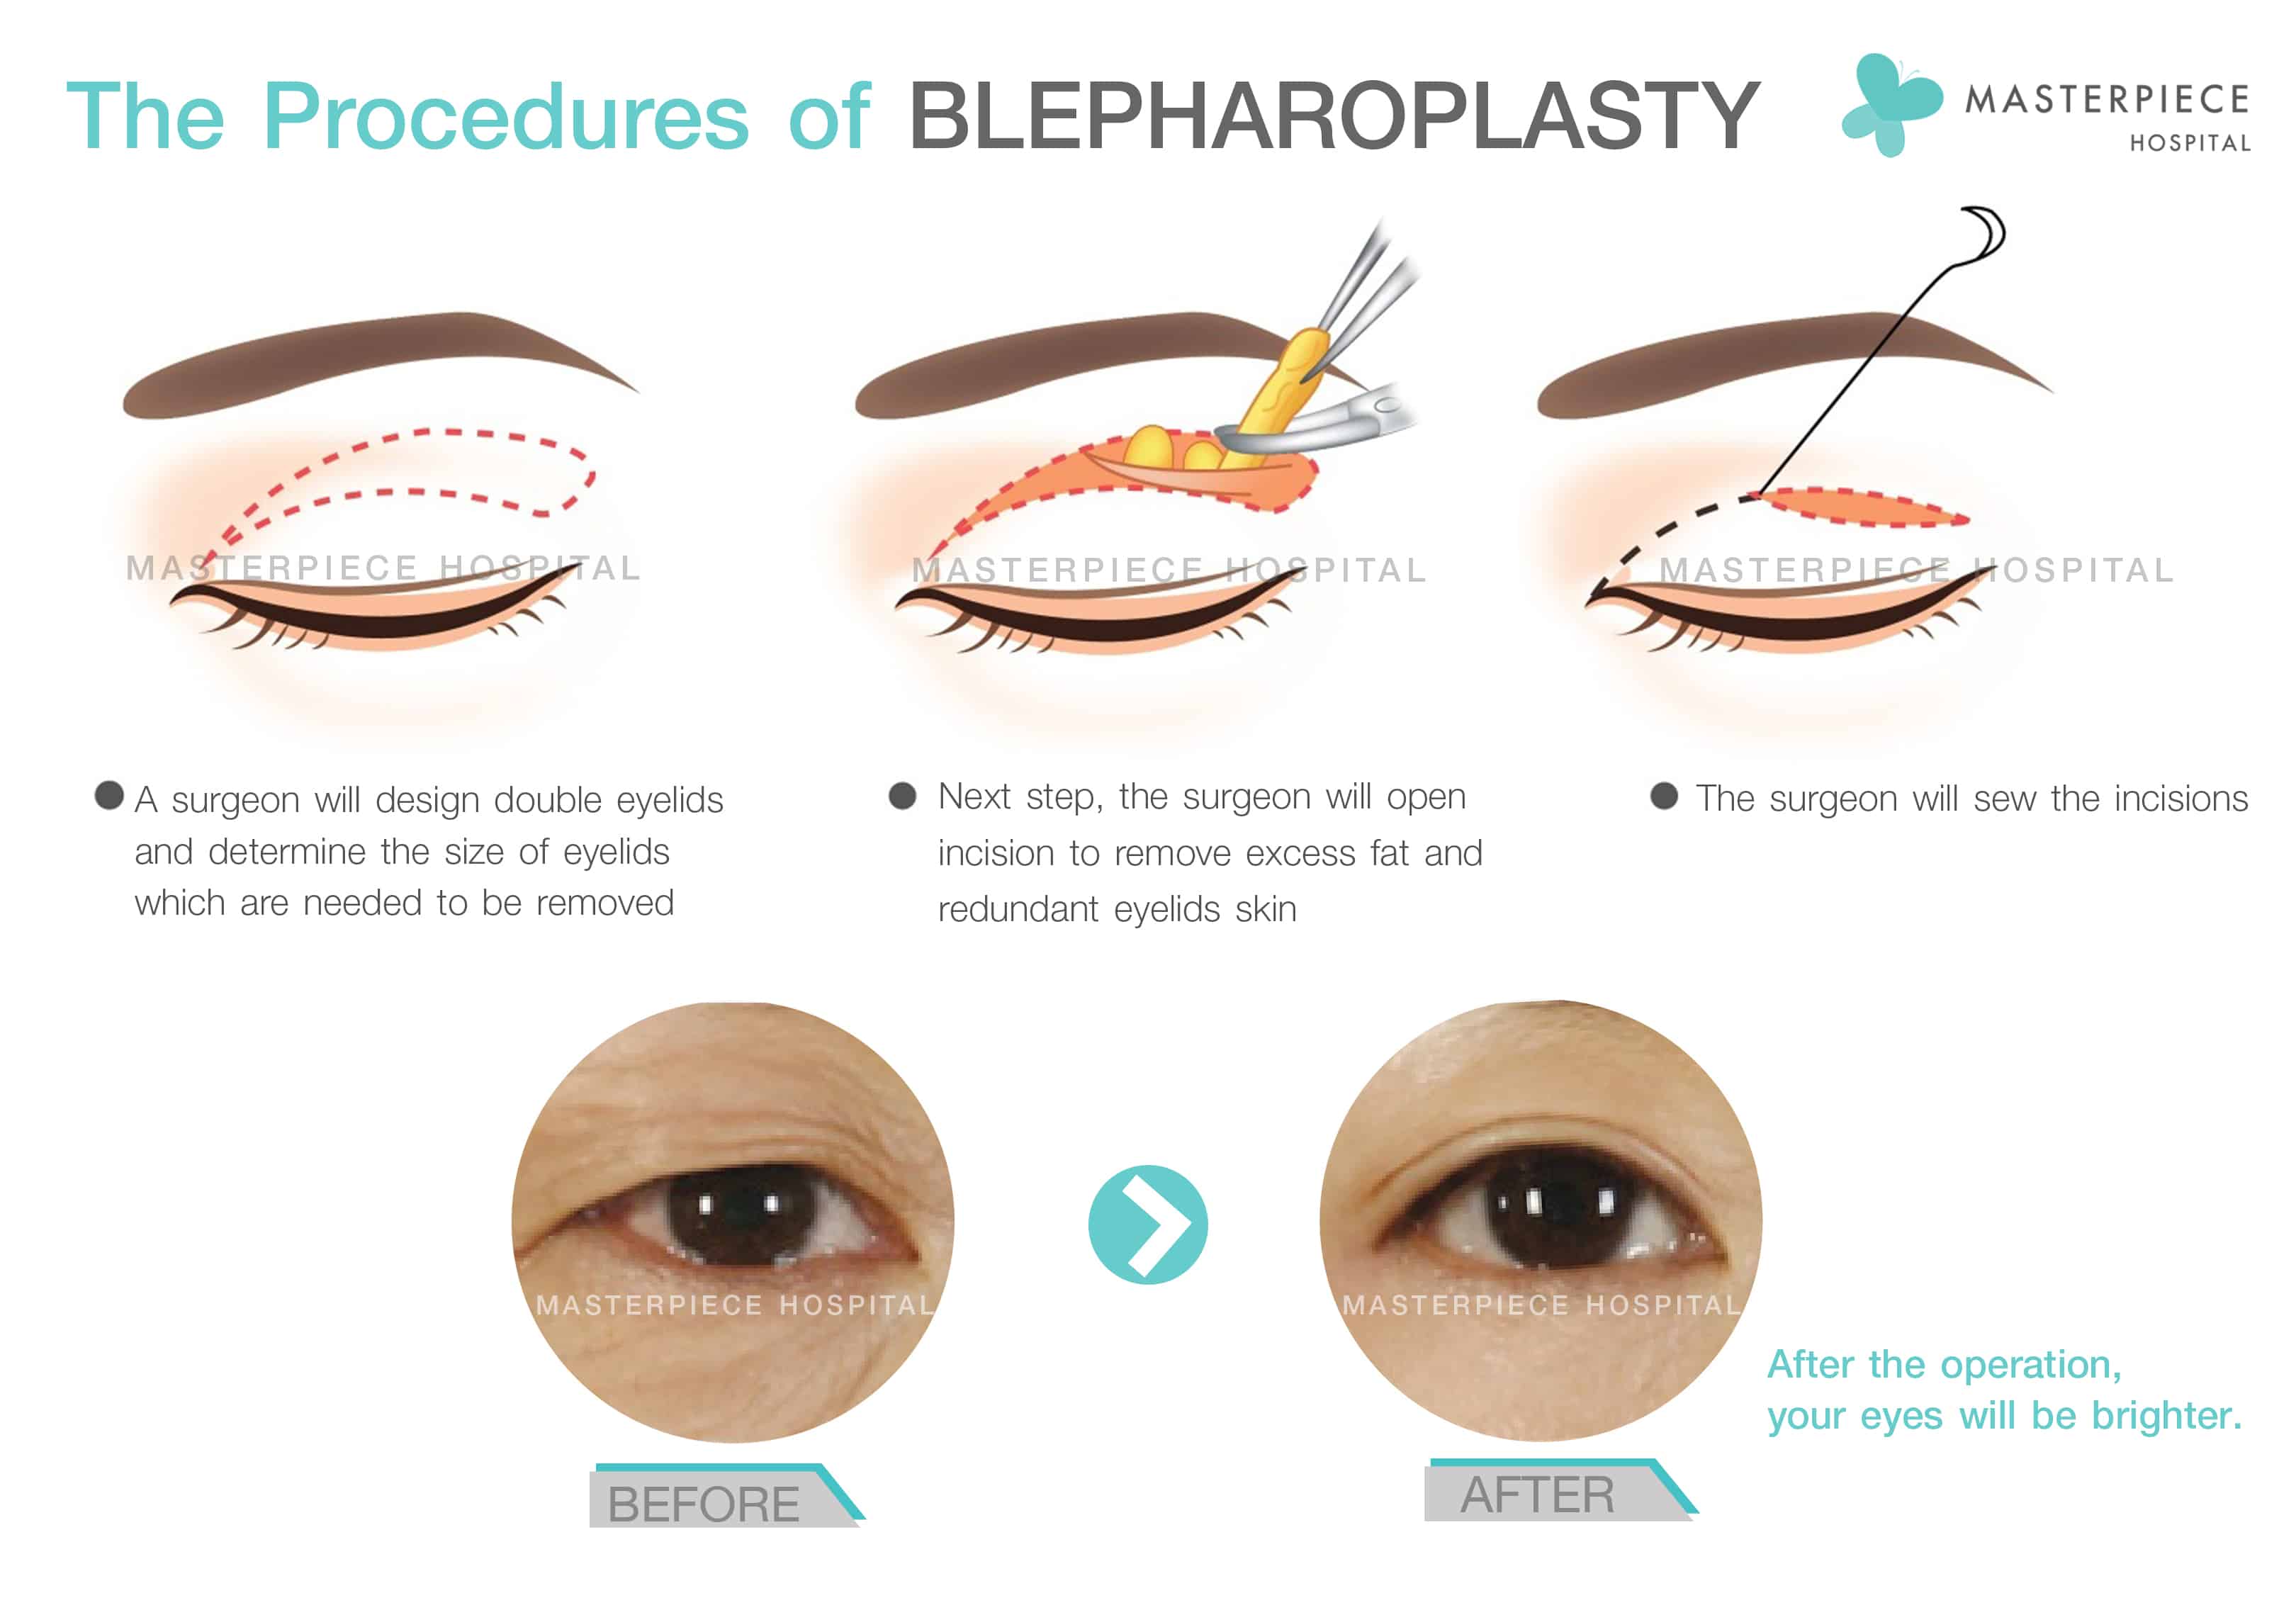 The Procedures of Blepharoplasty at Masterpiece Hospital